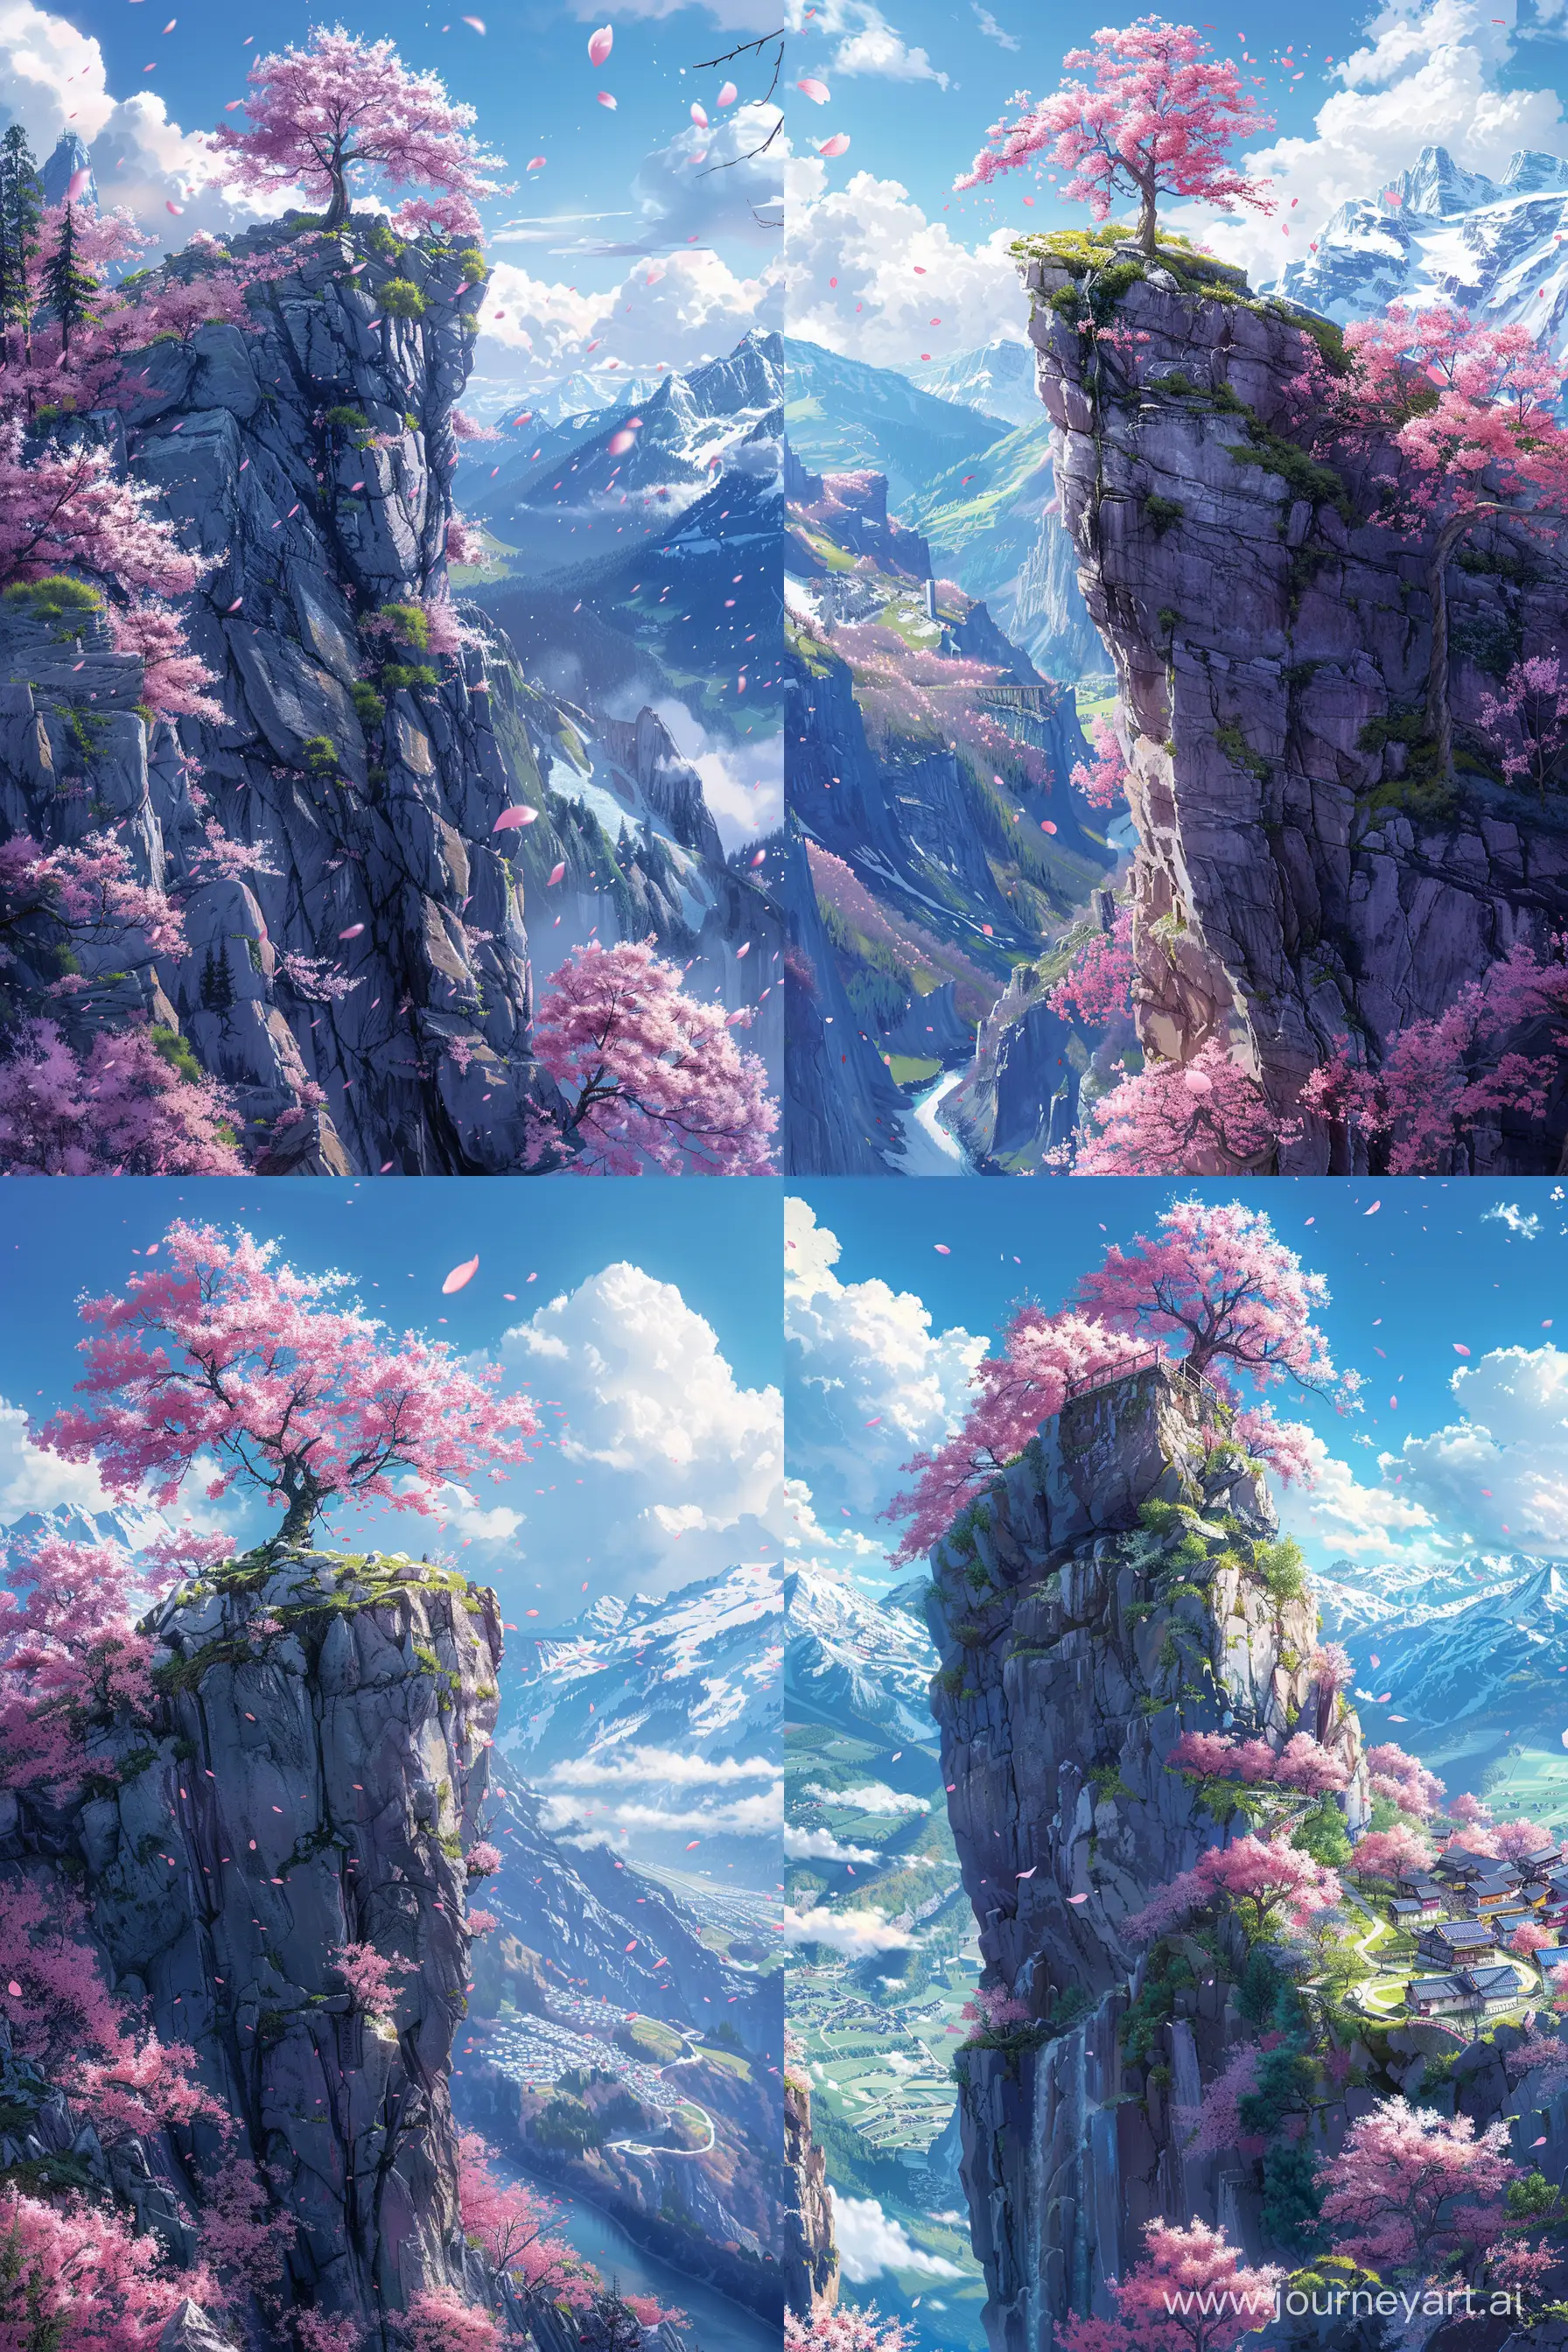 Beautiful anime scenary, mokoto shinkai style
view of rock cliff, cherry blossom tree one top,close up perspective view of cherry blossom, spring comming, beautiful contrast, blue sky, illustration, breeze, Switzerland mountain side view, ultra HD, high quality, smooth details, anime scenary, no hyperrealistic --ar 2:3 --s 400